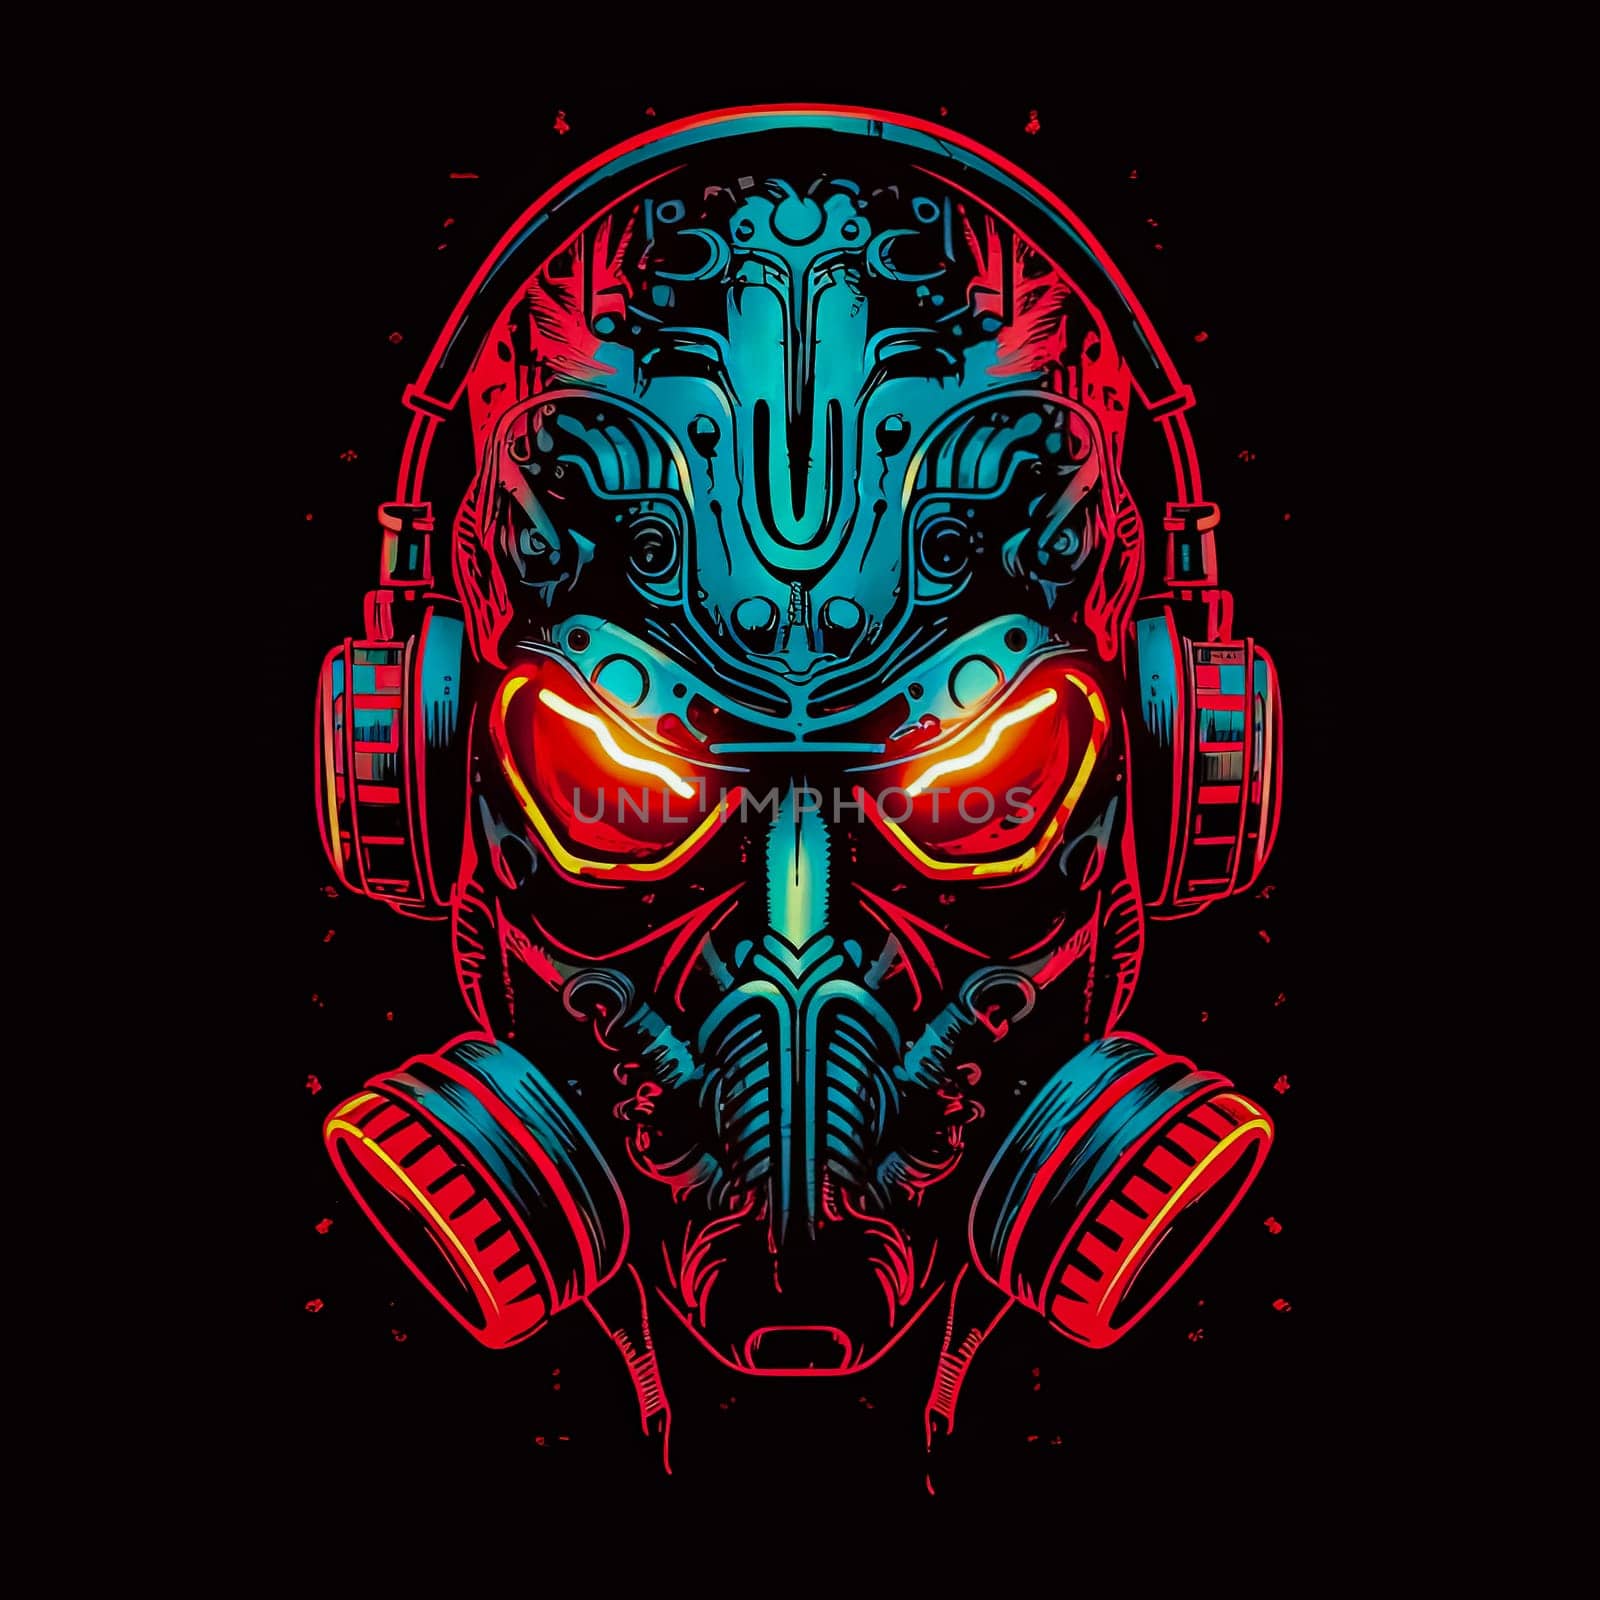 A skull with red and blue colors and a red flame on the right side. The skull is wearing headphones and has a red eye. Scene is dark and futuristic